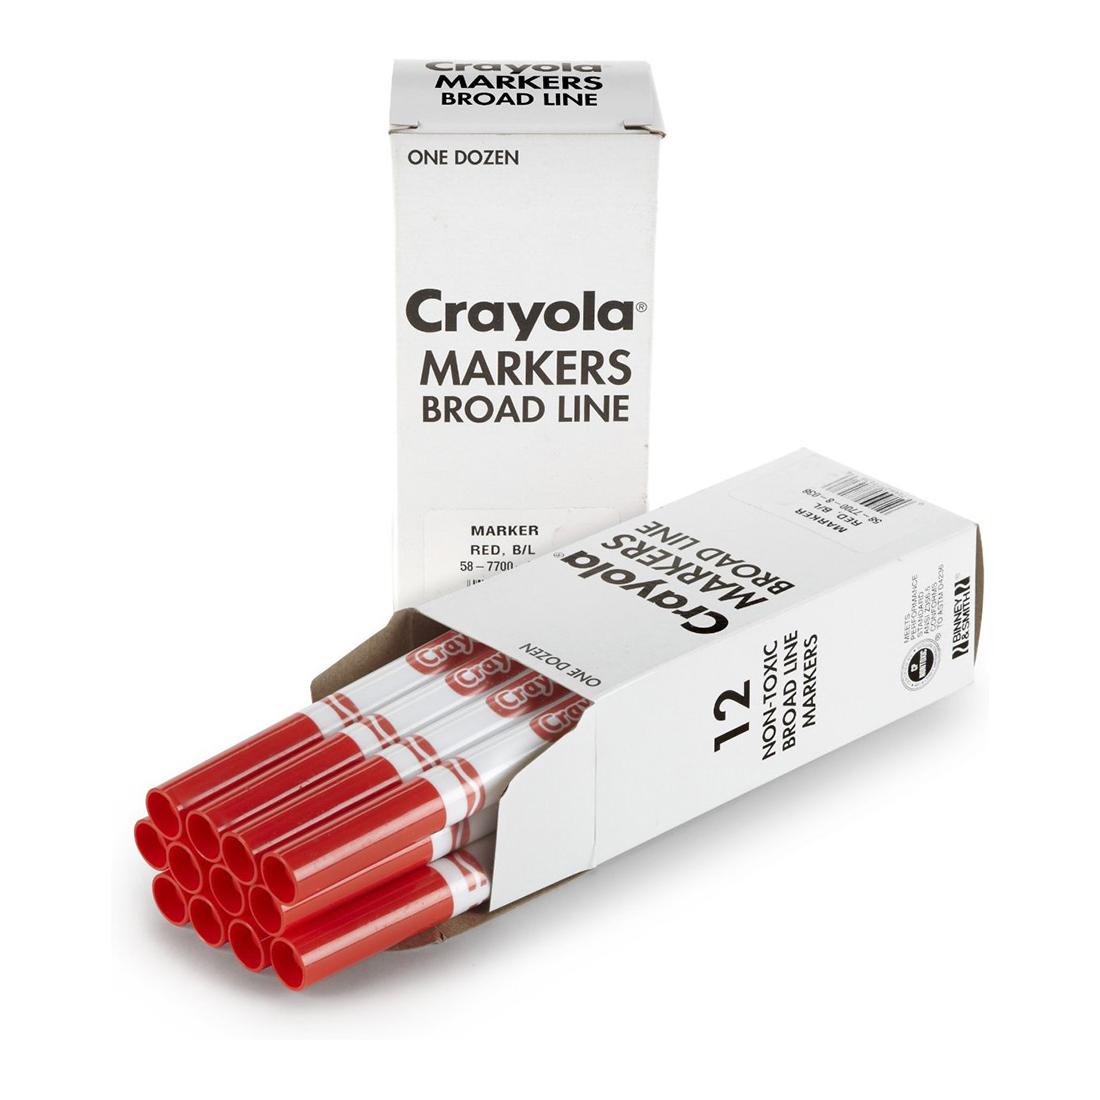 Box of Crayola Broad Line Marker Refills shown both closed and open with 12 Red Markers